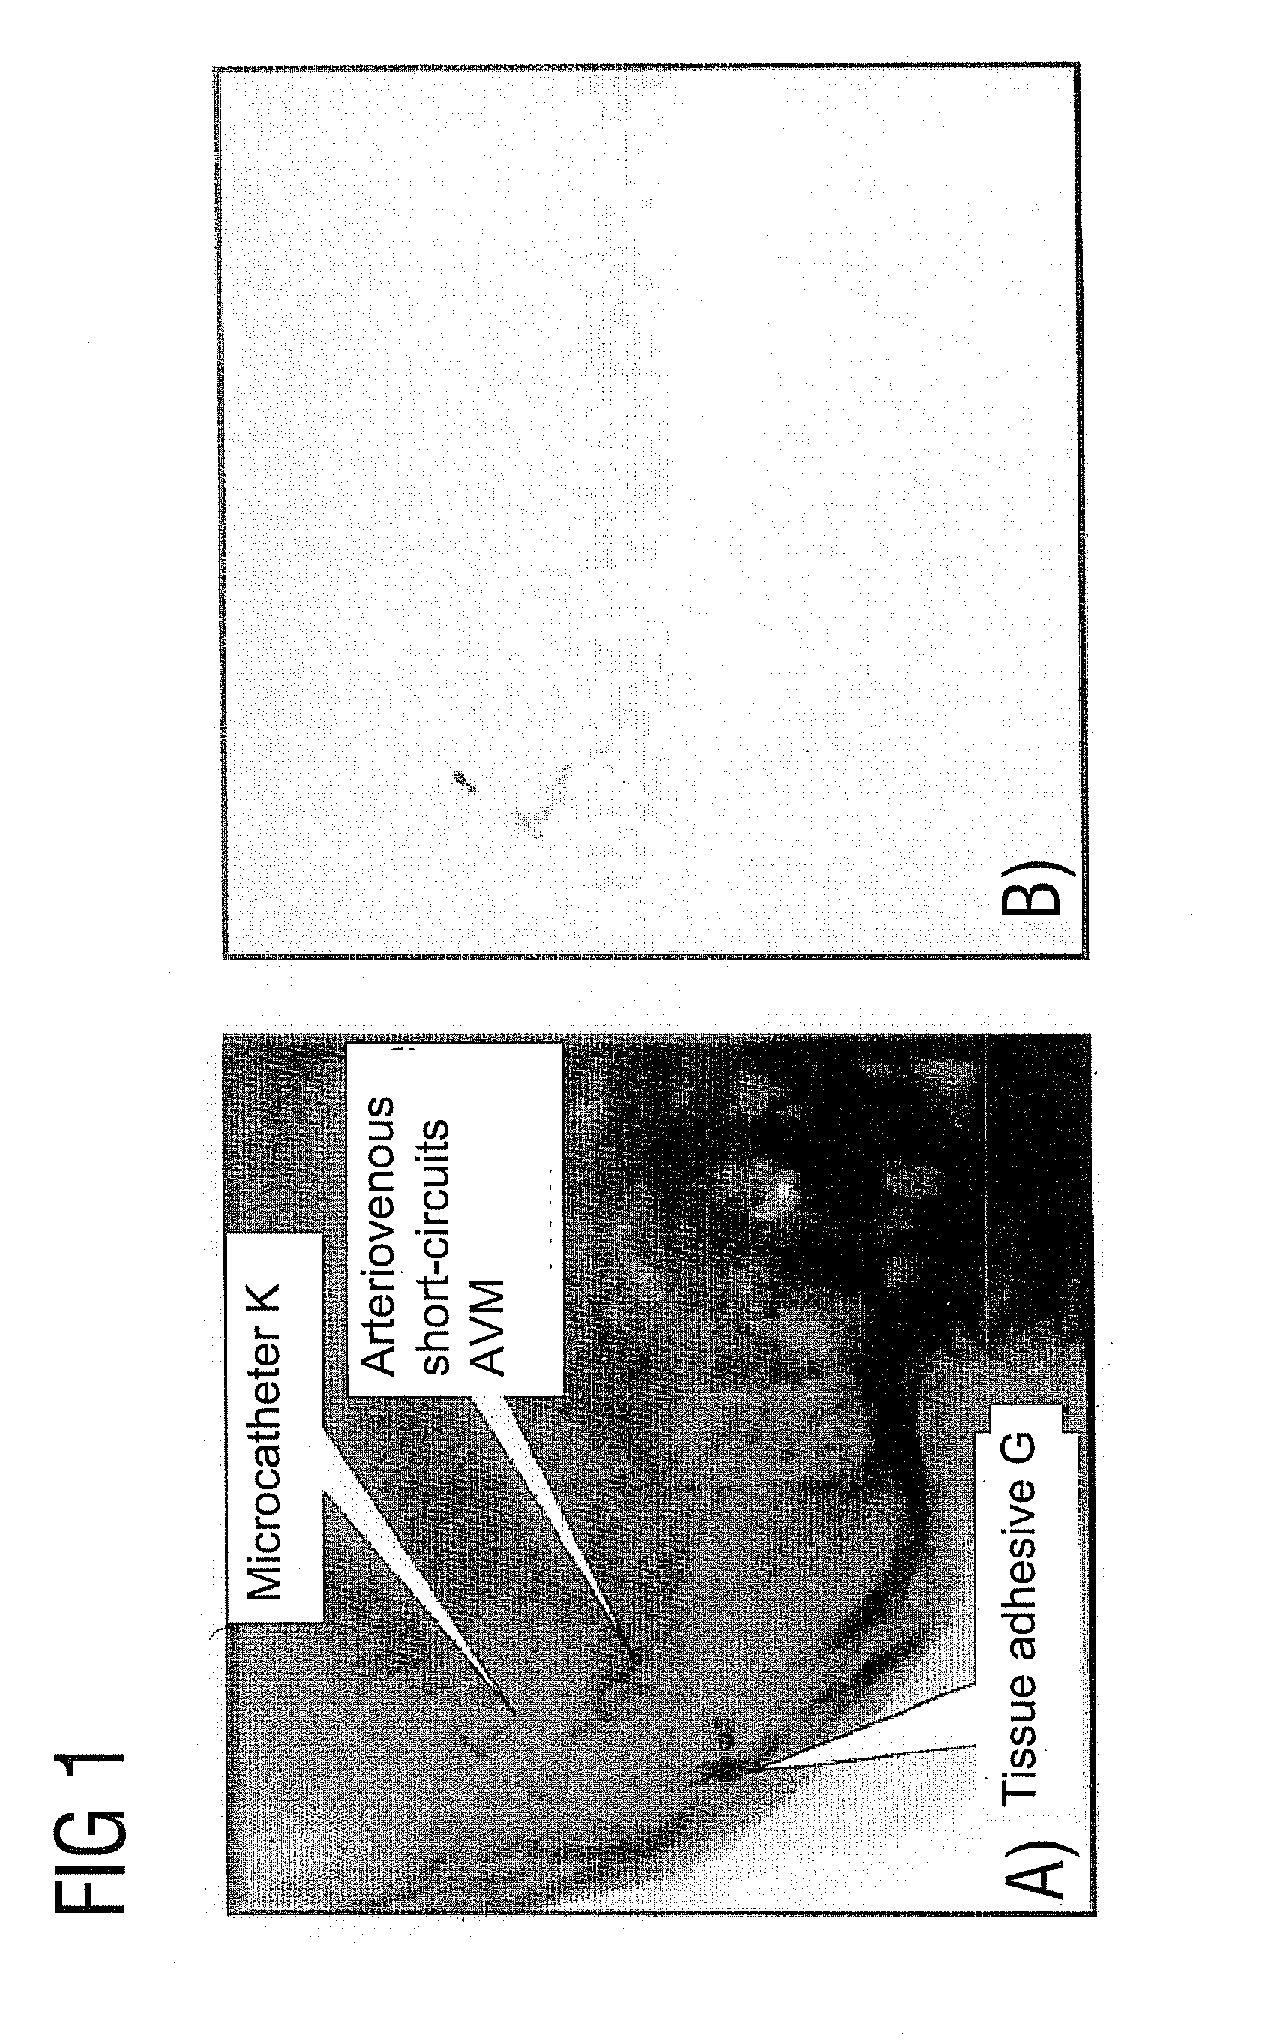 Method for computing a color-coded analysis image